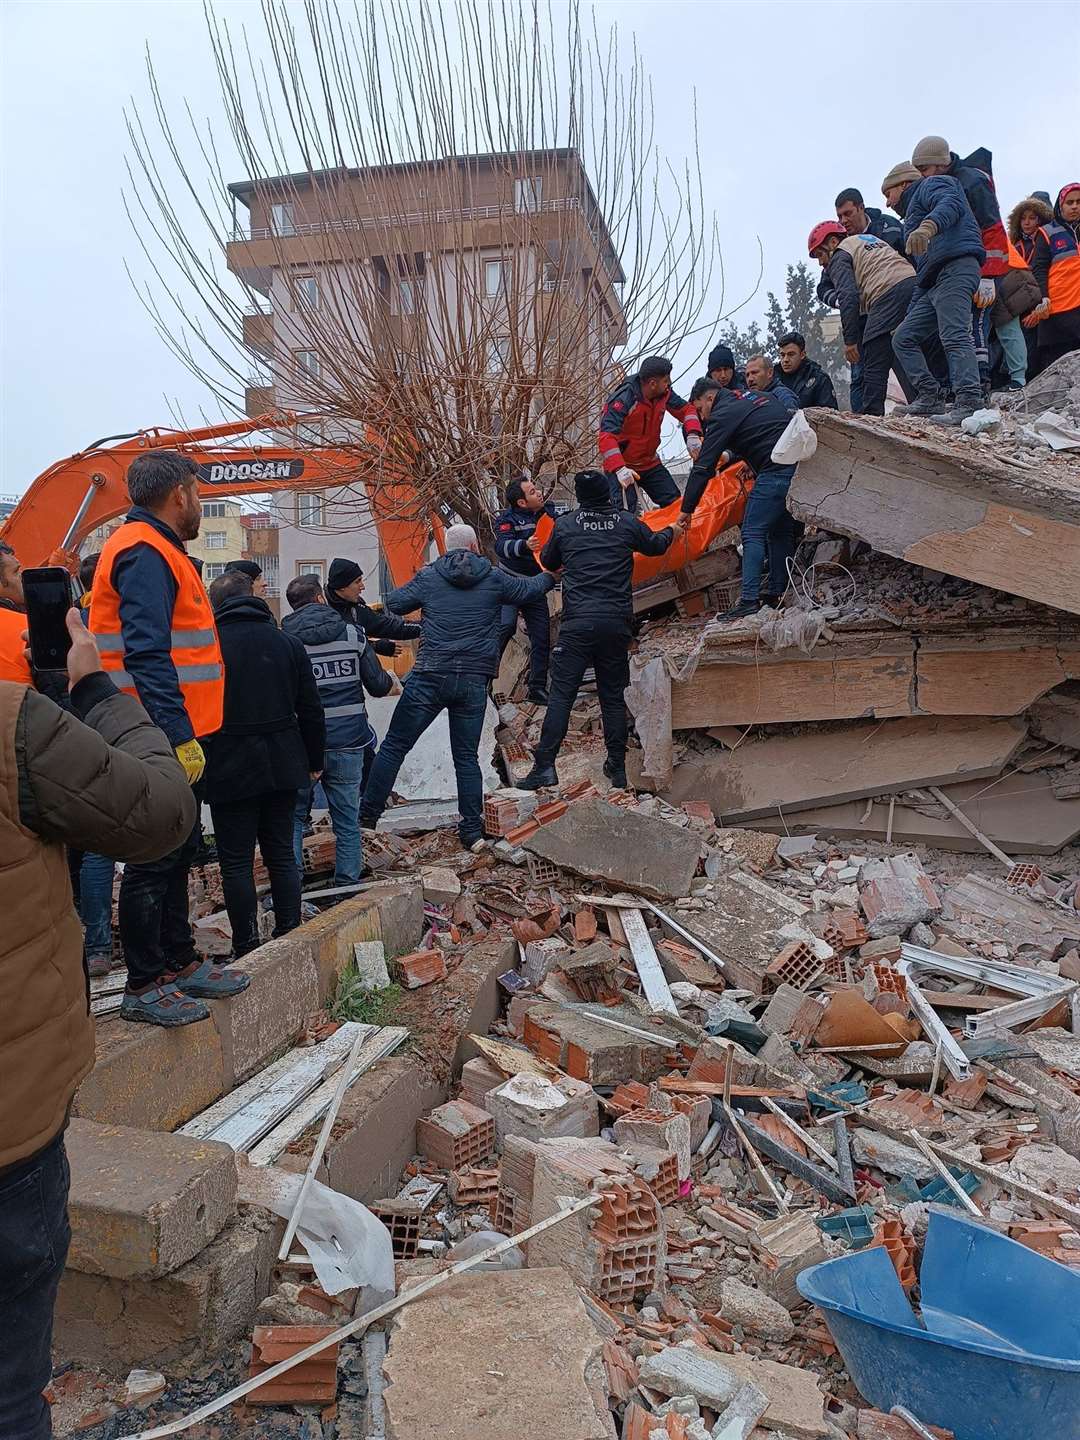 Police and volunteers removing a body from a collapsed building in Sanliurfa, Turkey (@mehmetyetim63/PA)